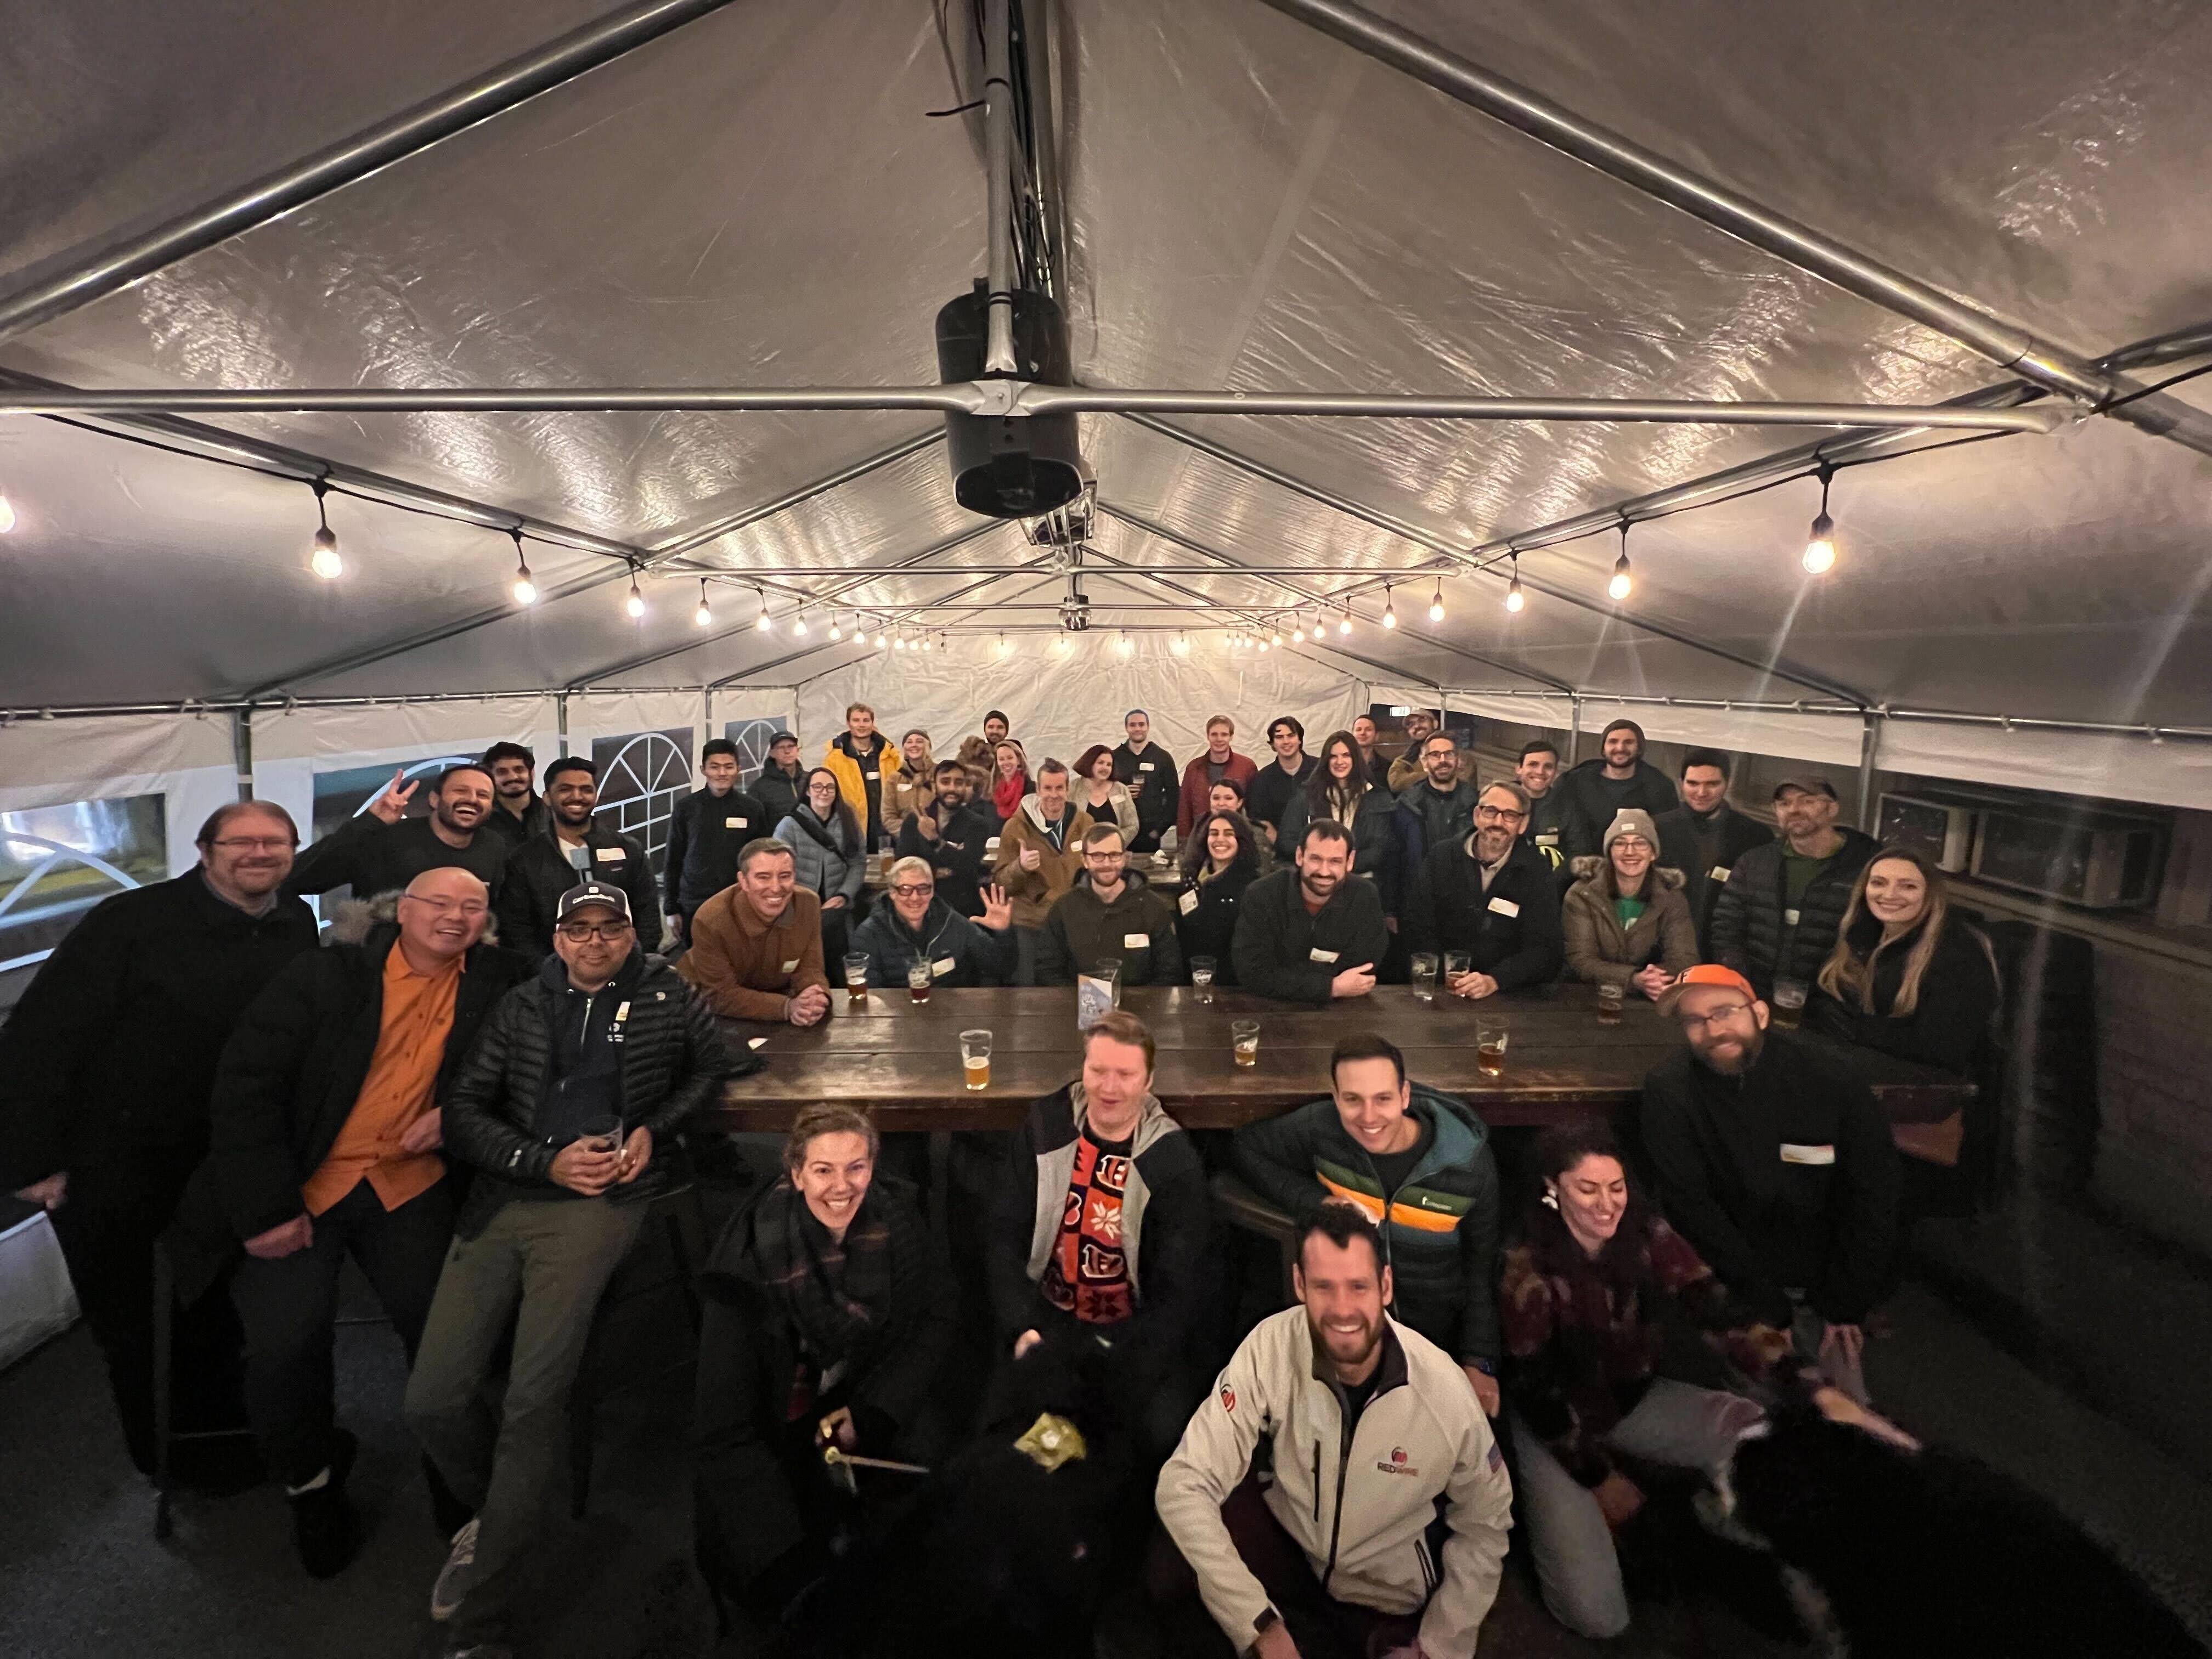 Large group of people beneath a large tarp with string lights smiling and looking at the camera.